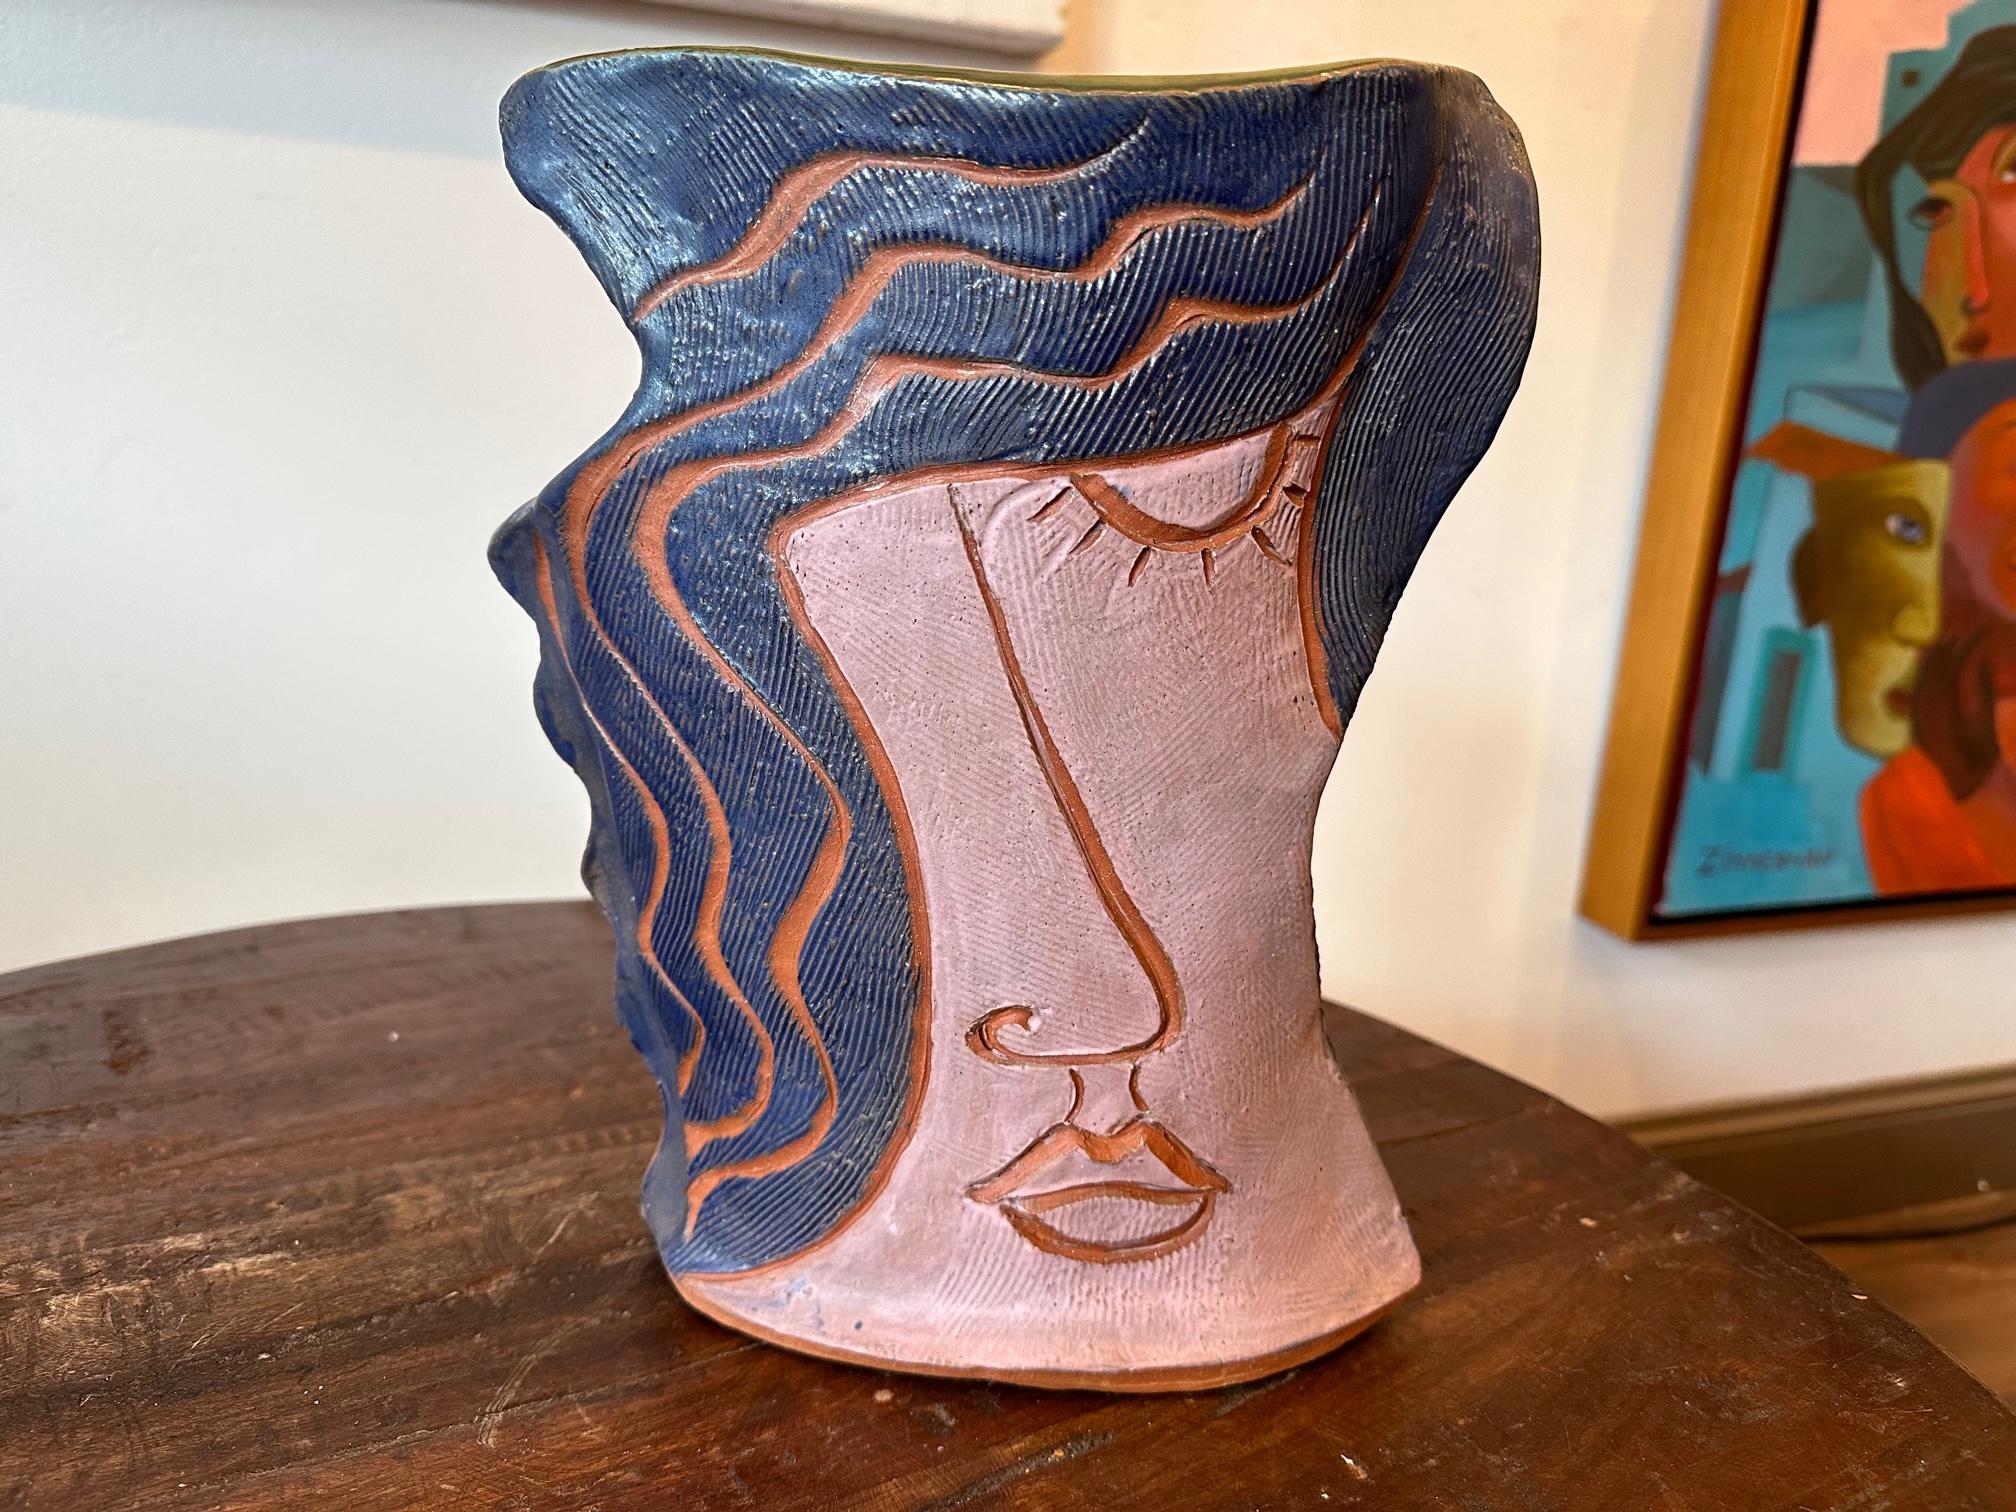 Functional Art Sculpture one of a kind by Marc Zimmerman

Figurative Vase - face - Clay Sculpture

This whimsical clay sculpture, created by the talented artist Marc Zimmerman, stands out as a one-of-a-kind masterpiece. Zimmerman's remarkable Clay